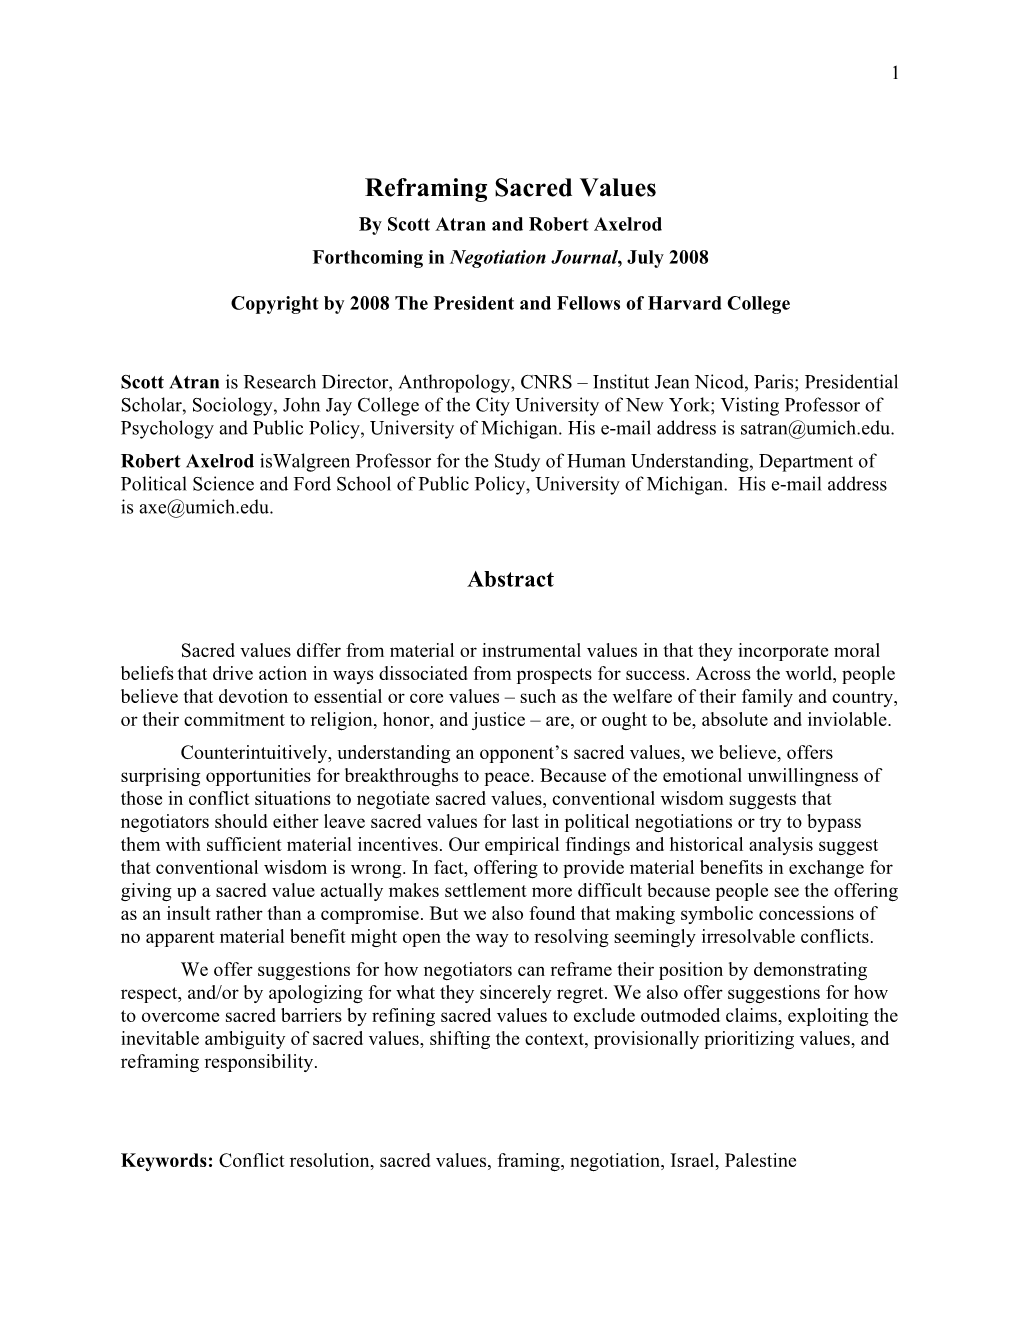 Reframing Sacred Values by Scott Atran and Robert Axelrod Forthcoming in Negotiation Journal, July 2008